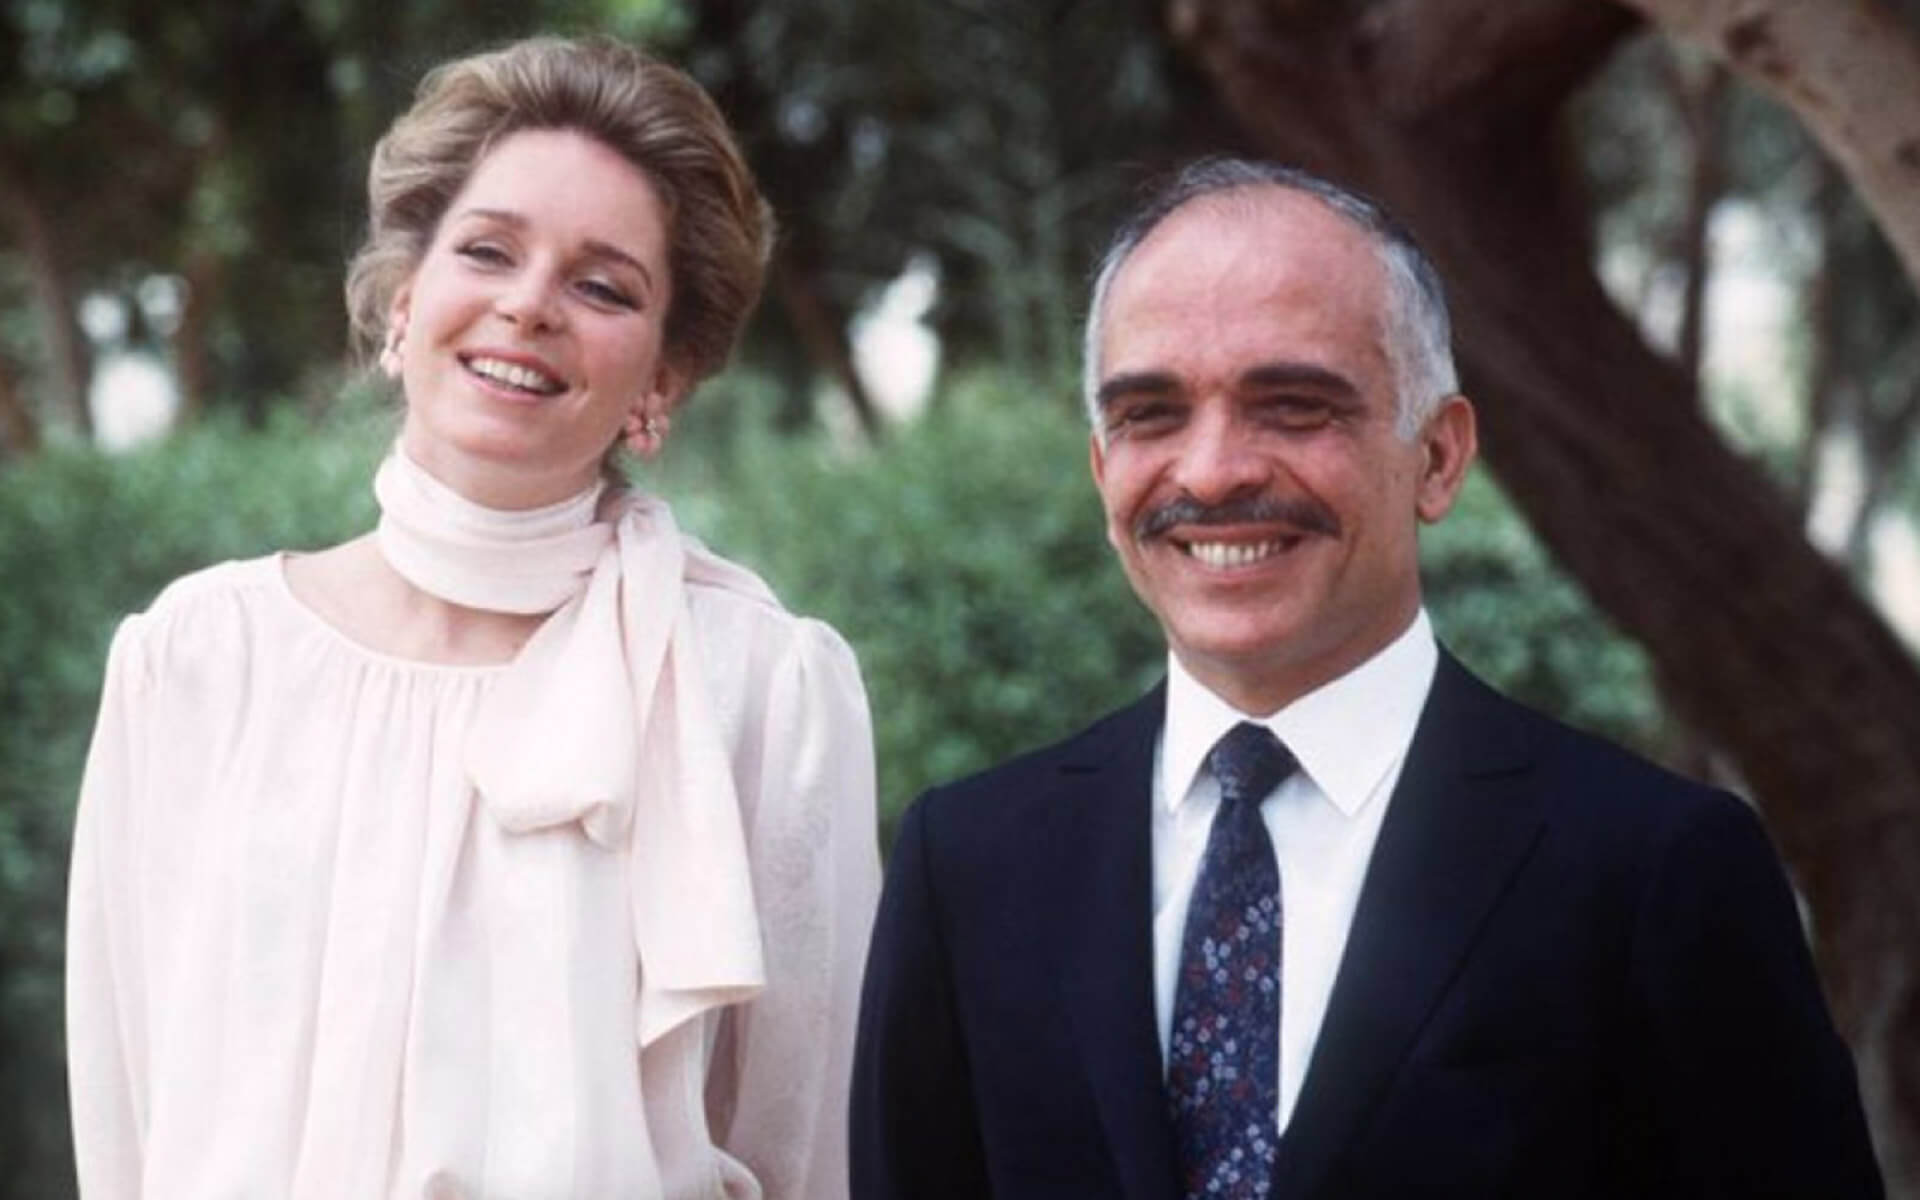 International Award - His Late Majesty King Hussein of Jordan and Her Majesty Queen Noor